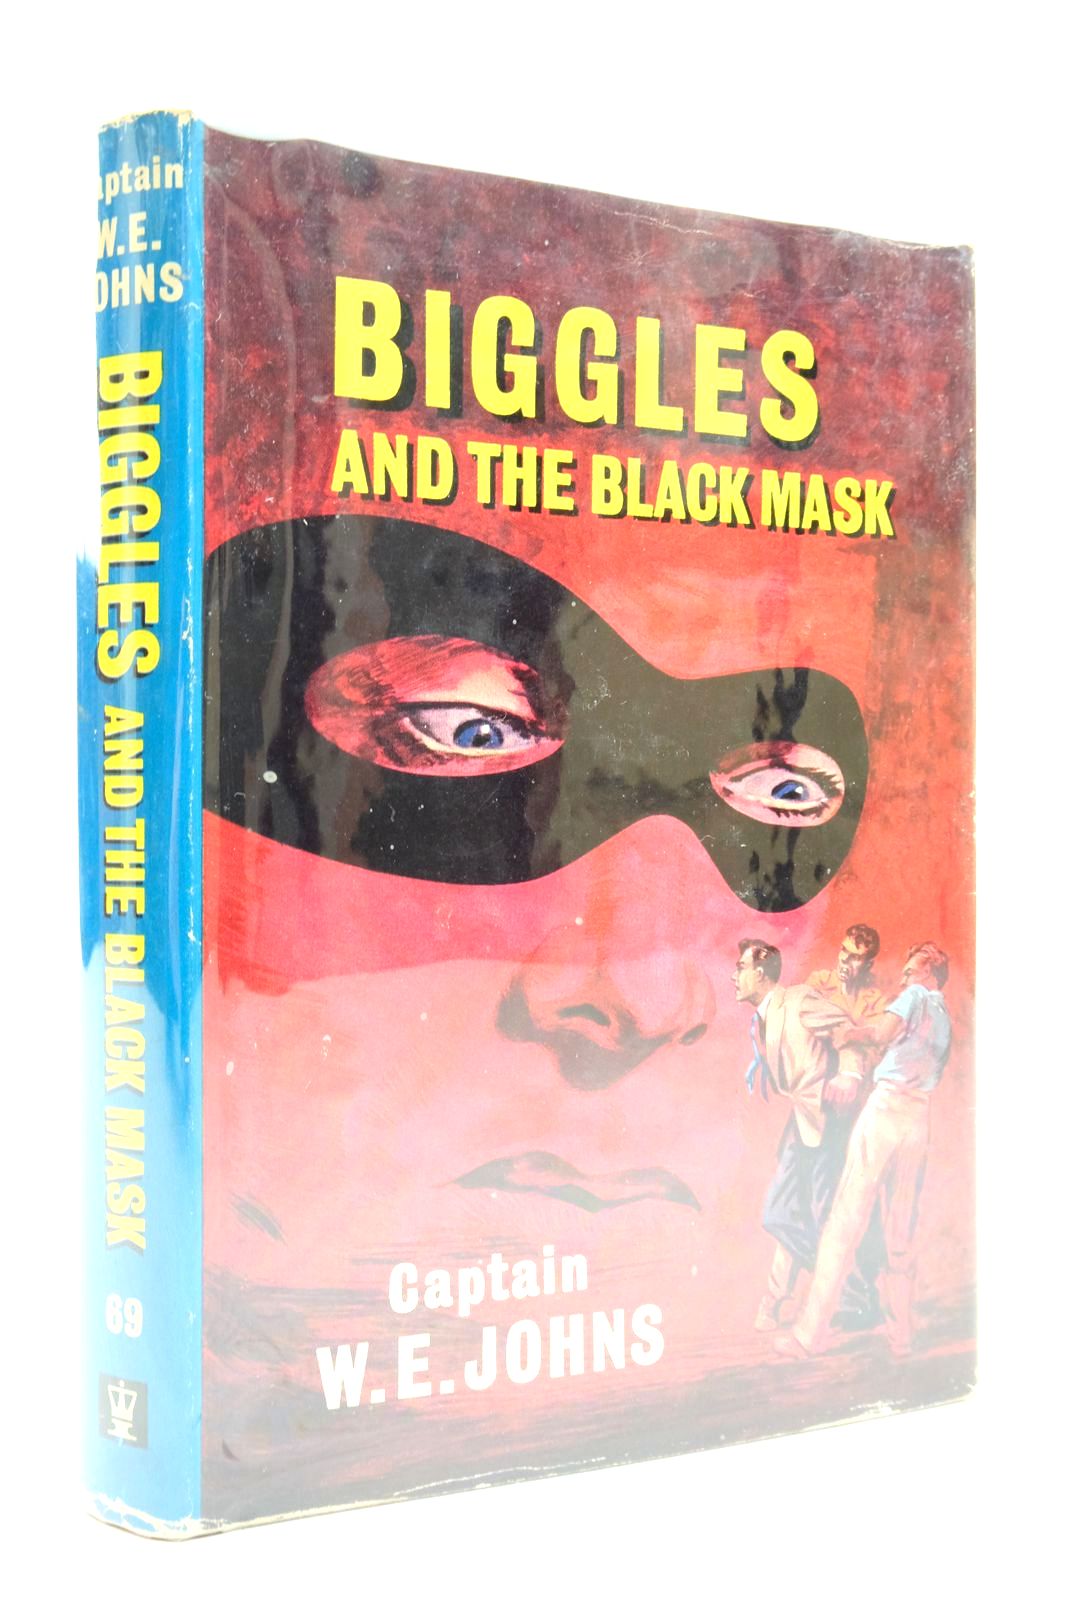 Photo of BIGGLES AND THE BLACK MASK written by Johns, W.E. illustrated by Stead,  published by Hodder &amp; Stoughton (STOCK CODE: 2137303)  for sale by Stella & Rose's Books